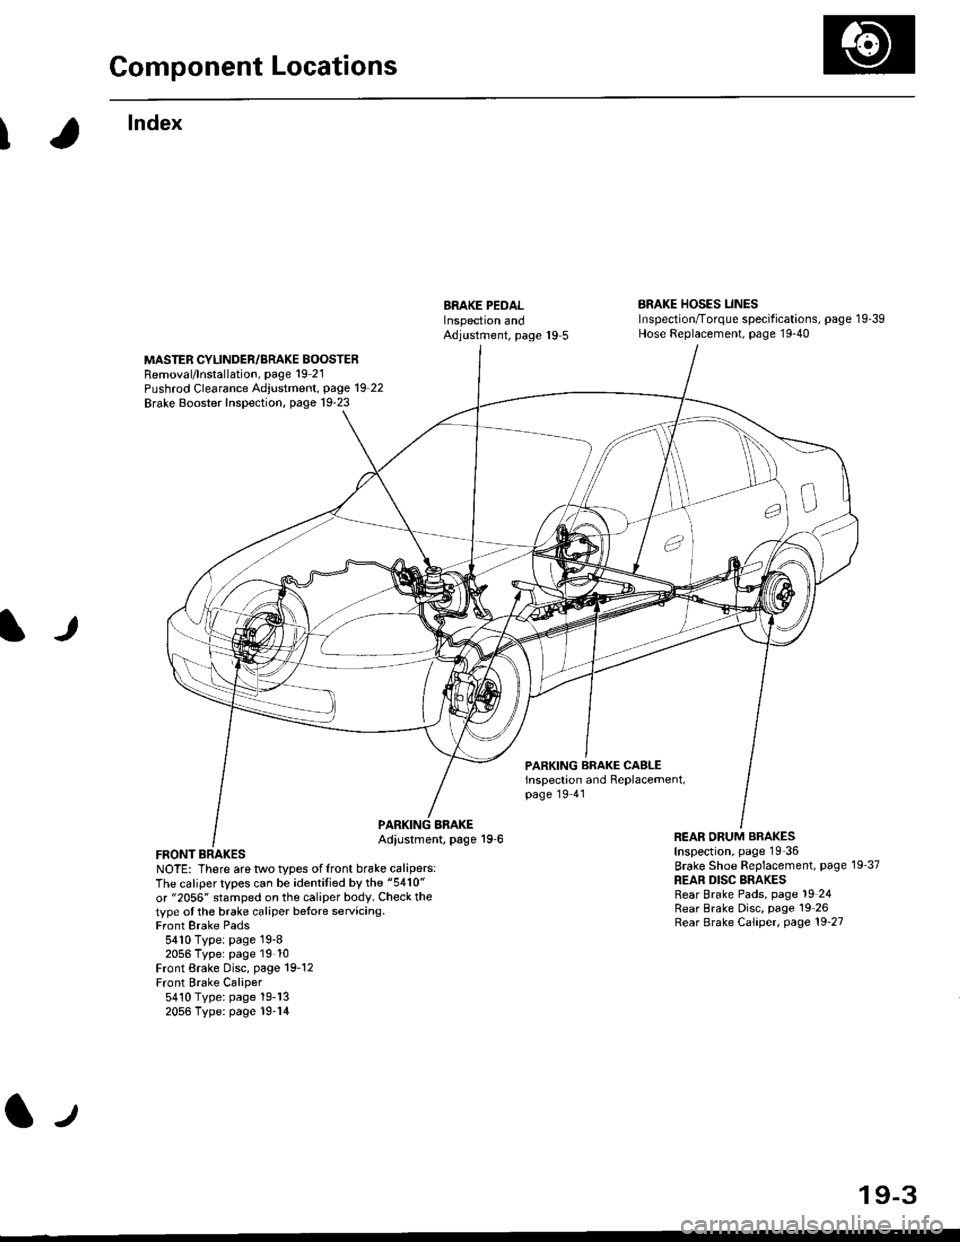 HONDA CIVIC 1999 6.G Workshop Manual Component Locations
I
lndex
ERAKE PEDALInspectron andAdjustment, page 19 5
BRAKE HOSES LINESInspection/Torque specif ications, page 1 9-39Hose Replacement, page 19-40
MASTER CYLINDER/BRAKE BOOSTERRemo